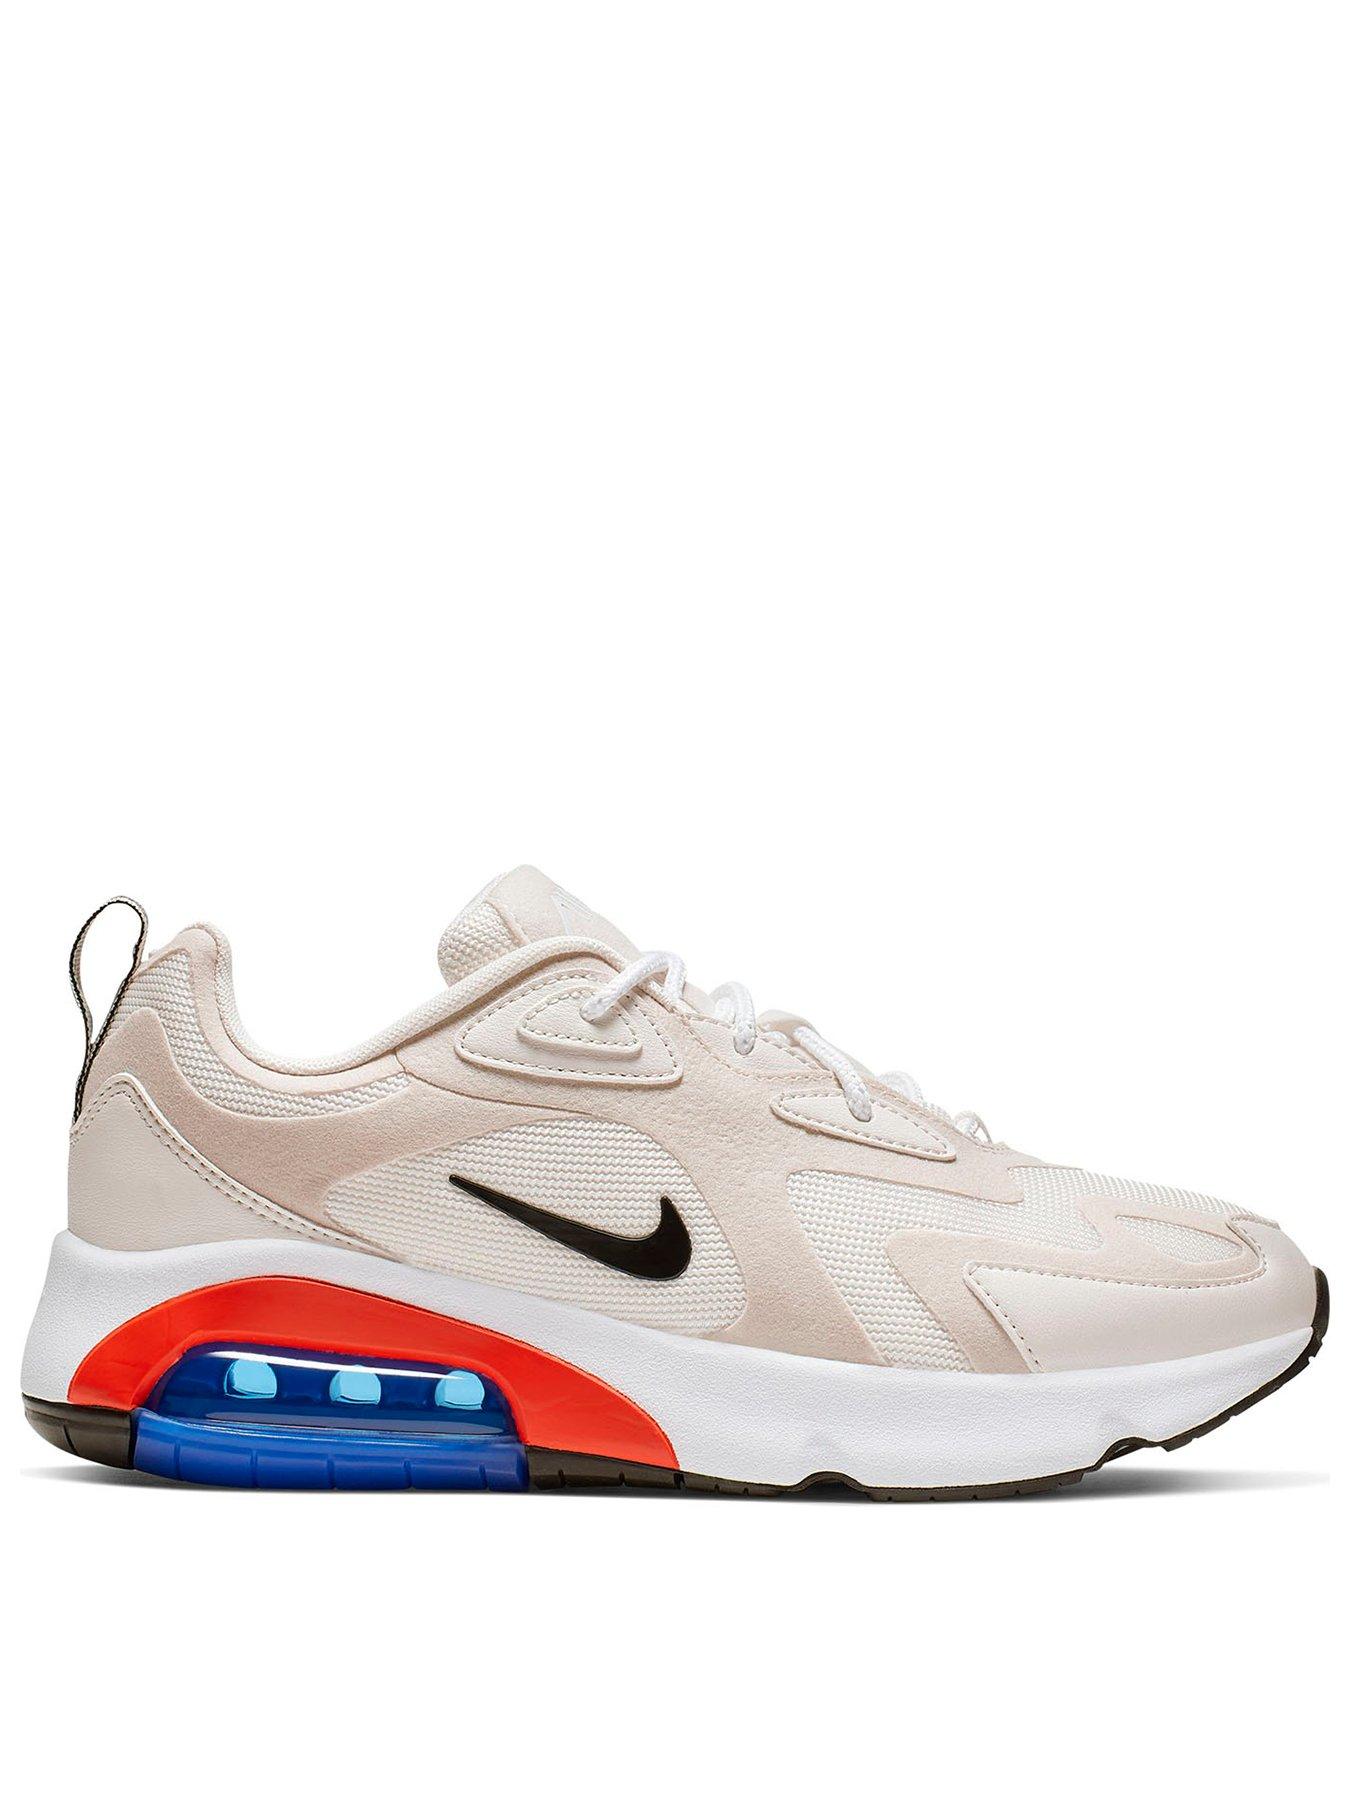 nike air max 200 trainers in cream